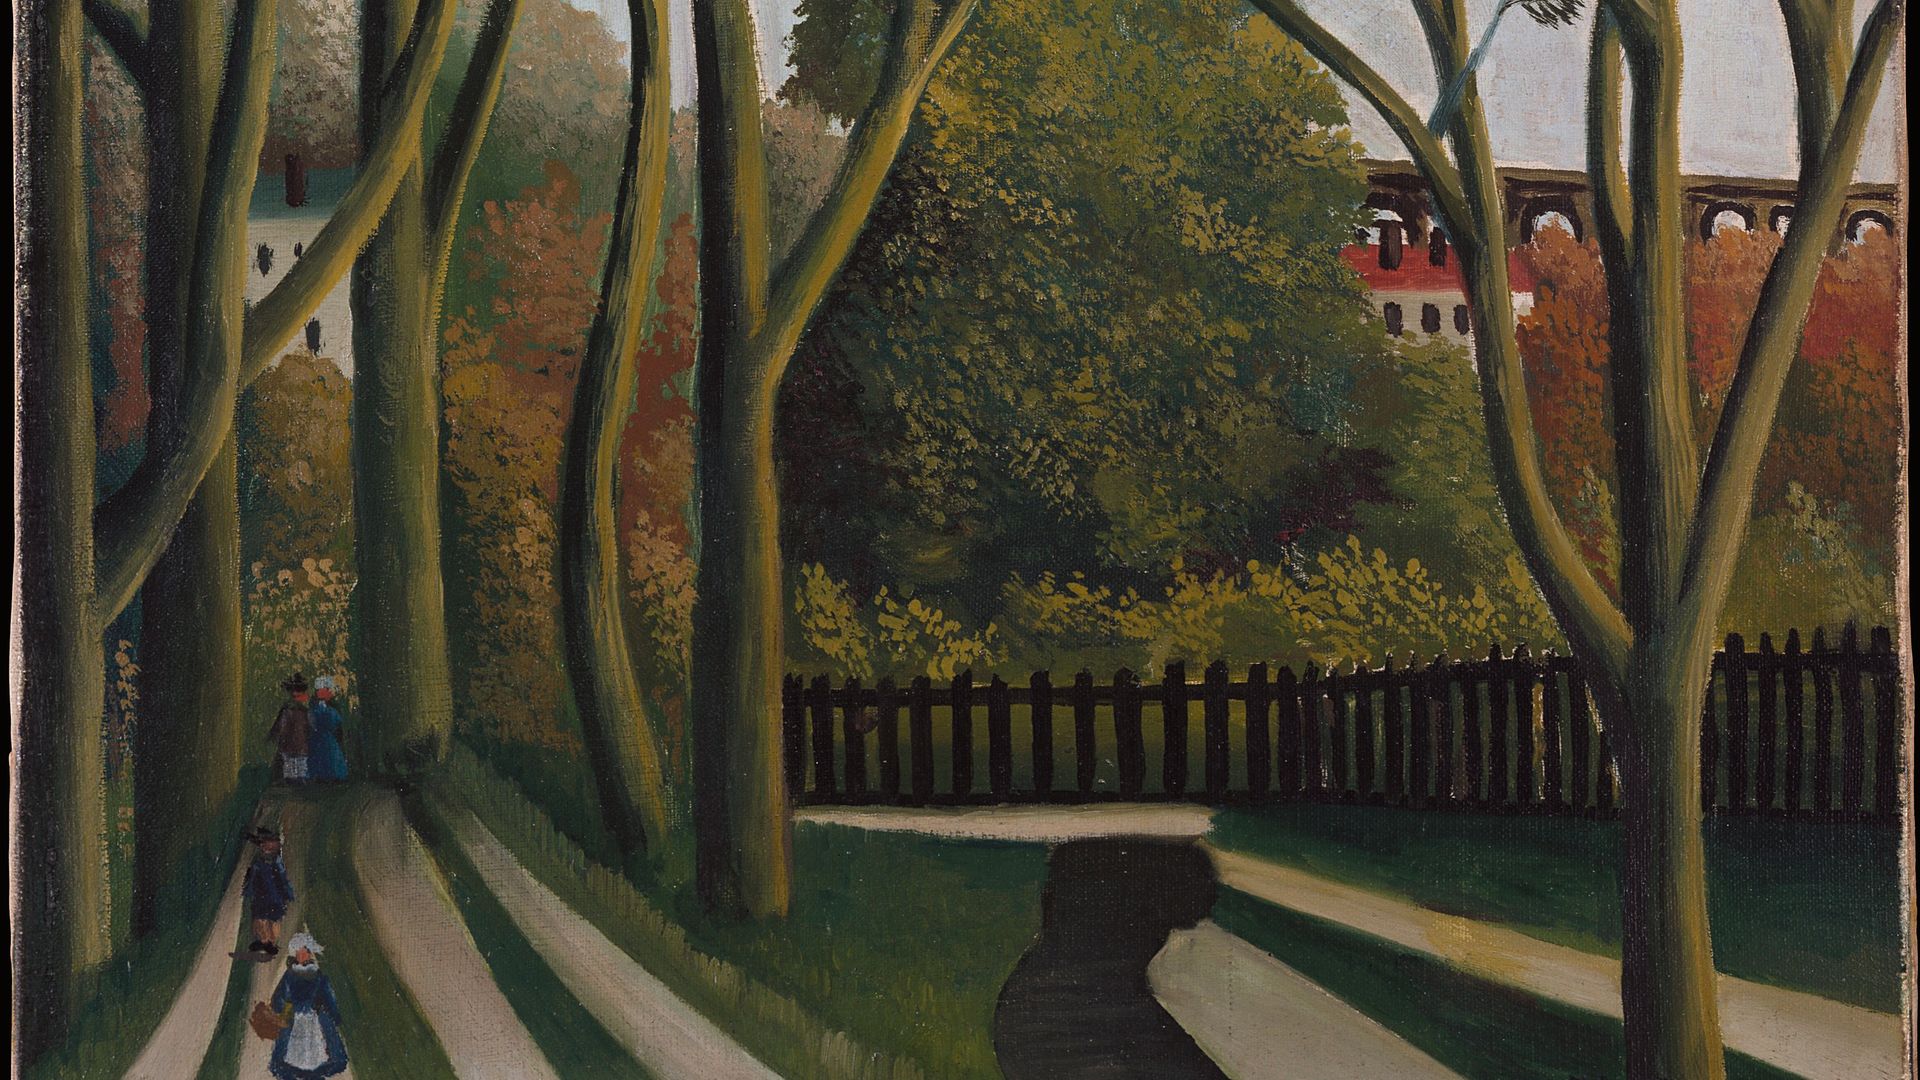 The Banks of the Bièvre near Bicêtre, by Henri Rousseau - Credit: The Met Museum